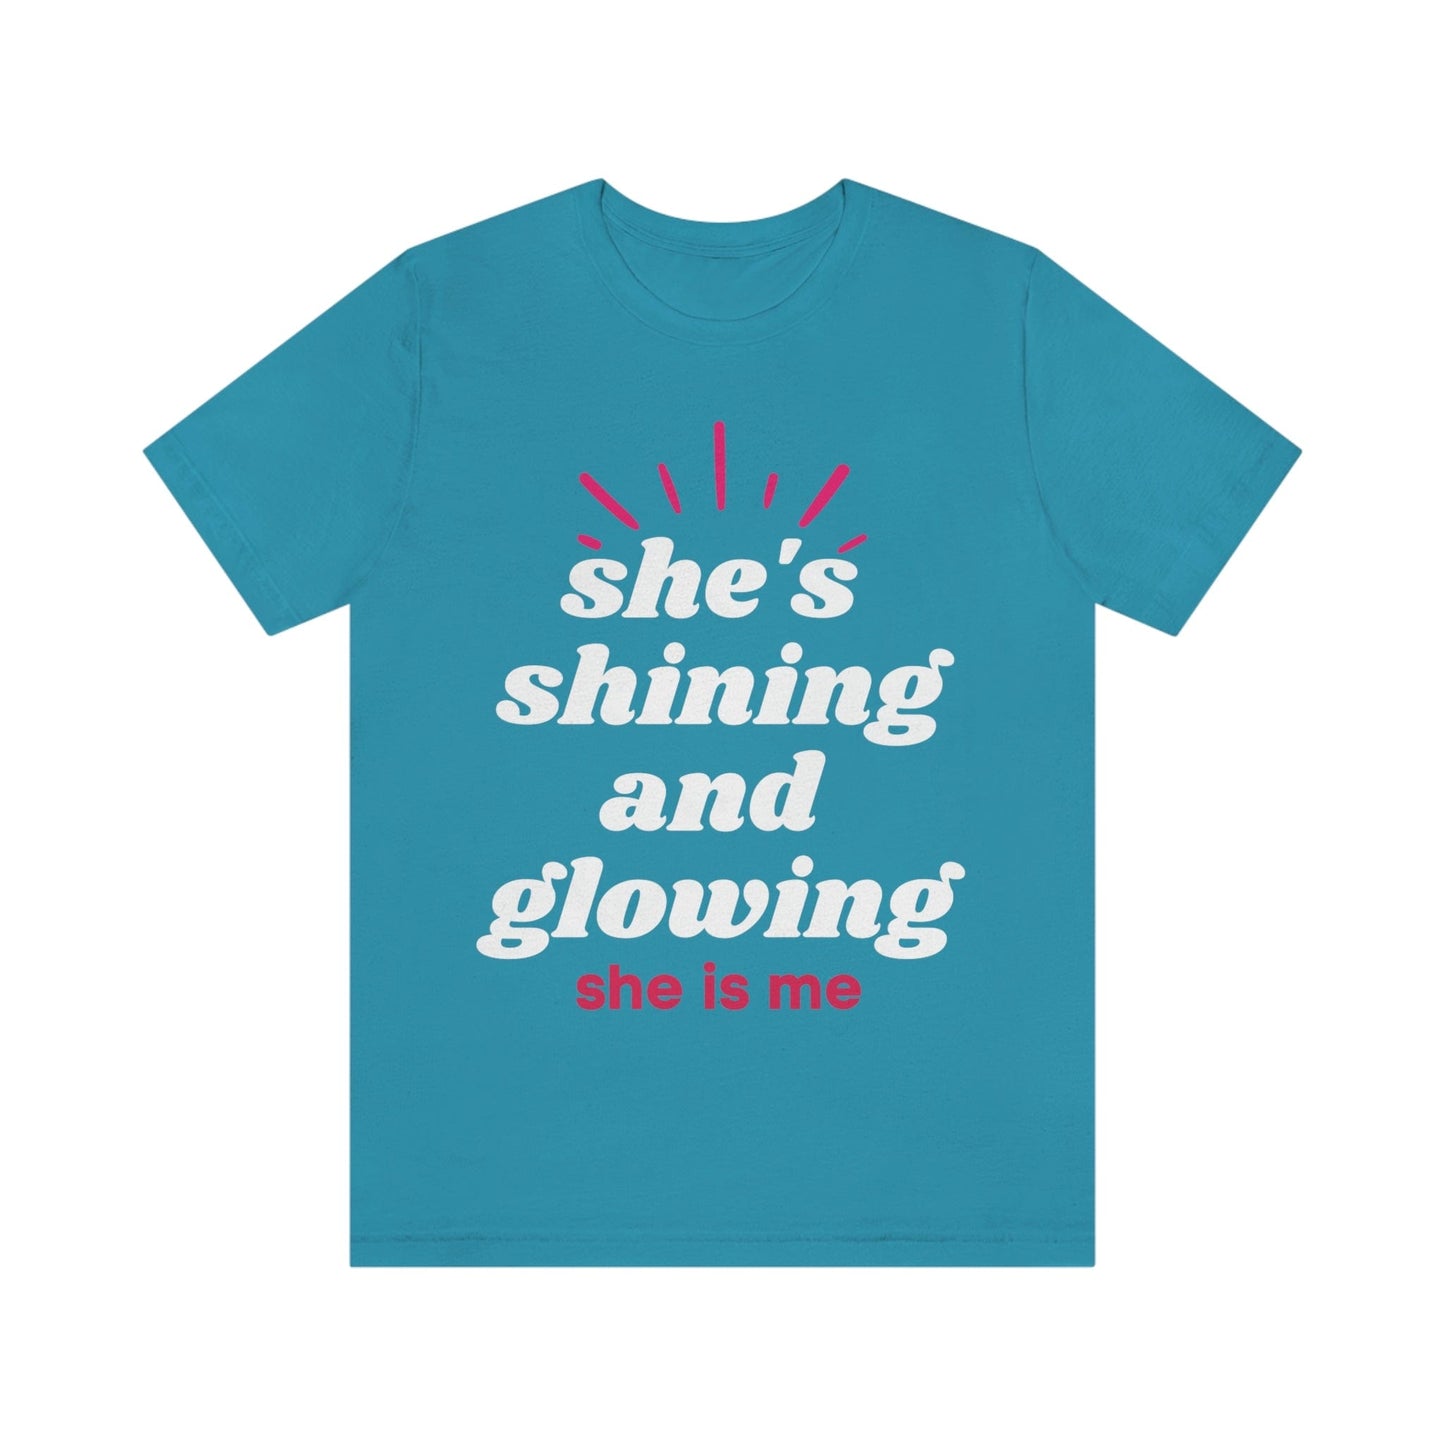 She's Shining and Glowing, She Is Me (Graphic White Text) Unisex Jersey Short Sleeve Tee - Style: Bella+Canvas 3001